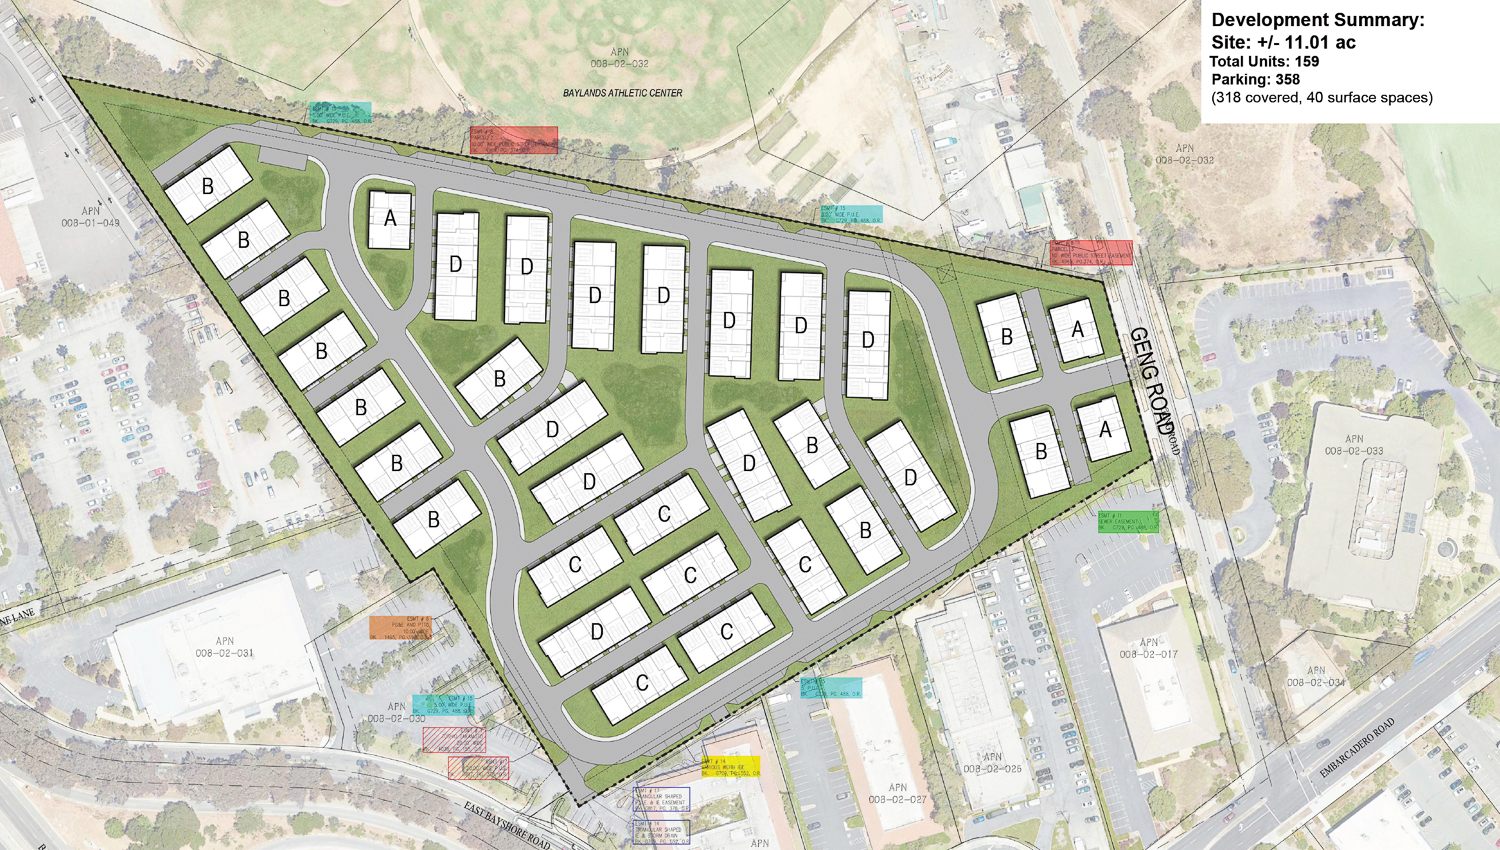 2400 Geng Road site map, illustration by Dahlin Group